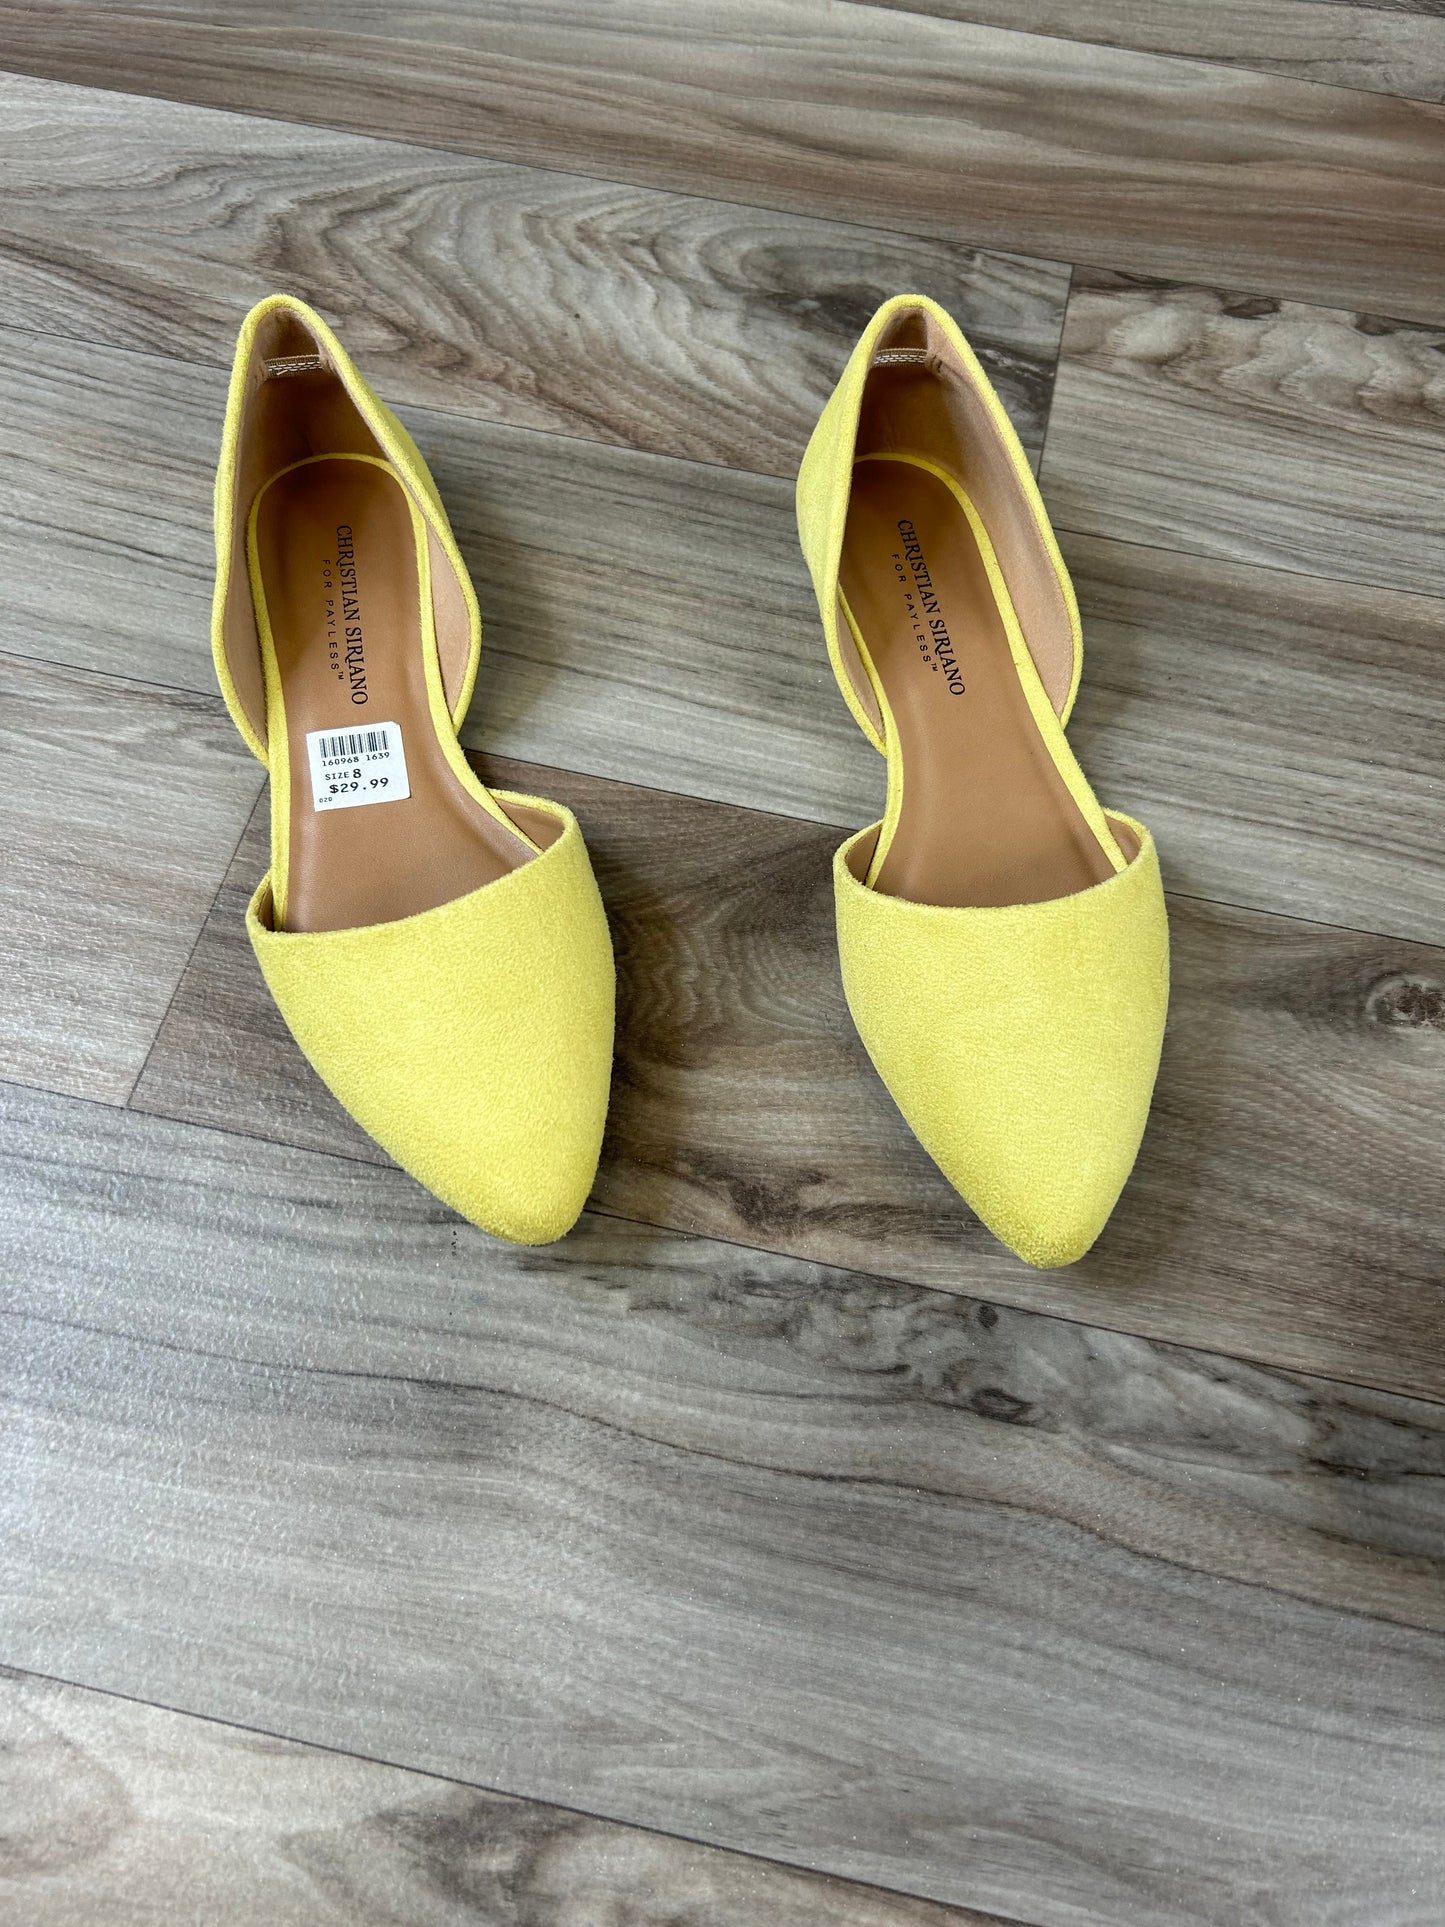 Shoes Flats By Christian Siriano For Payless  Size: 8